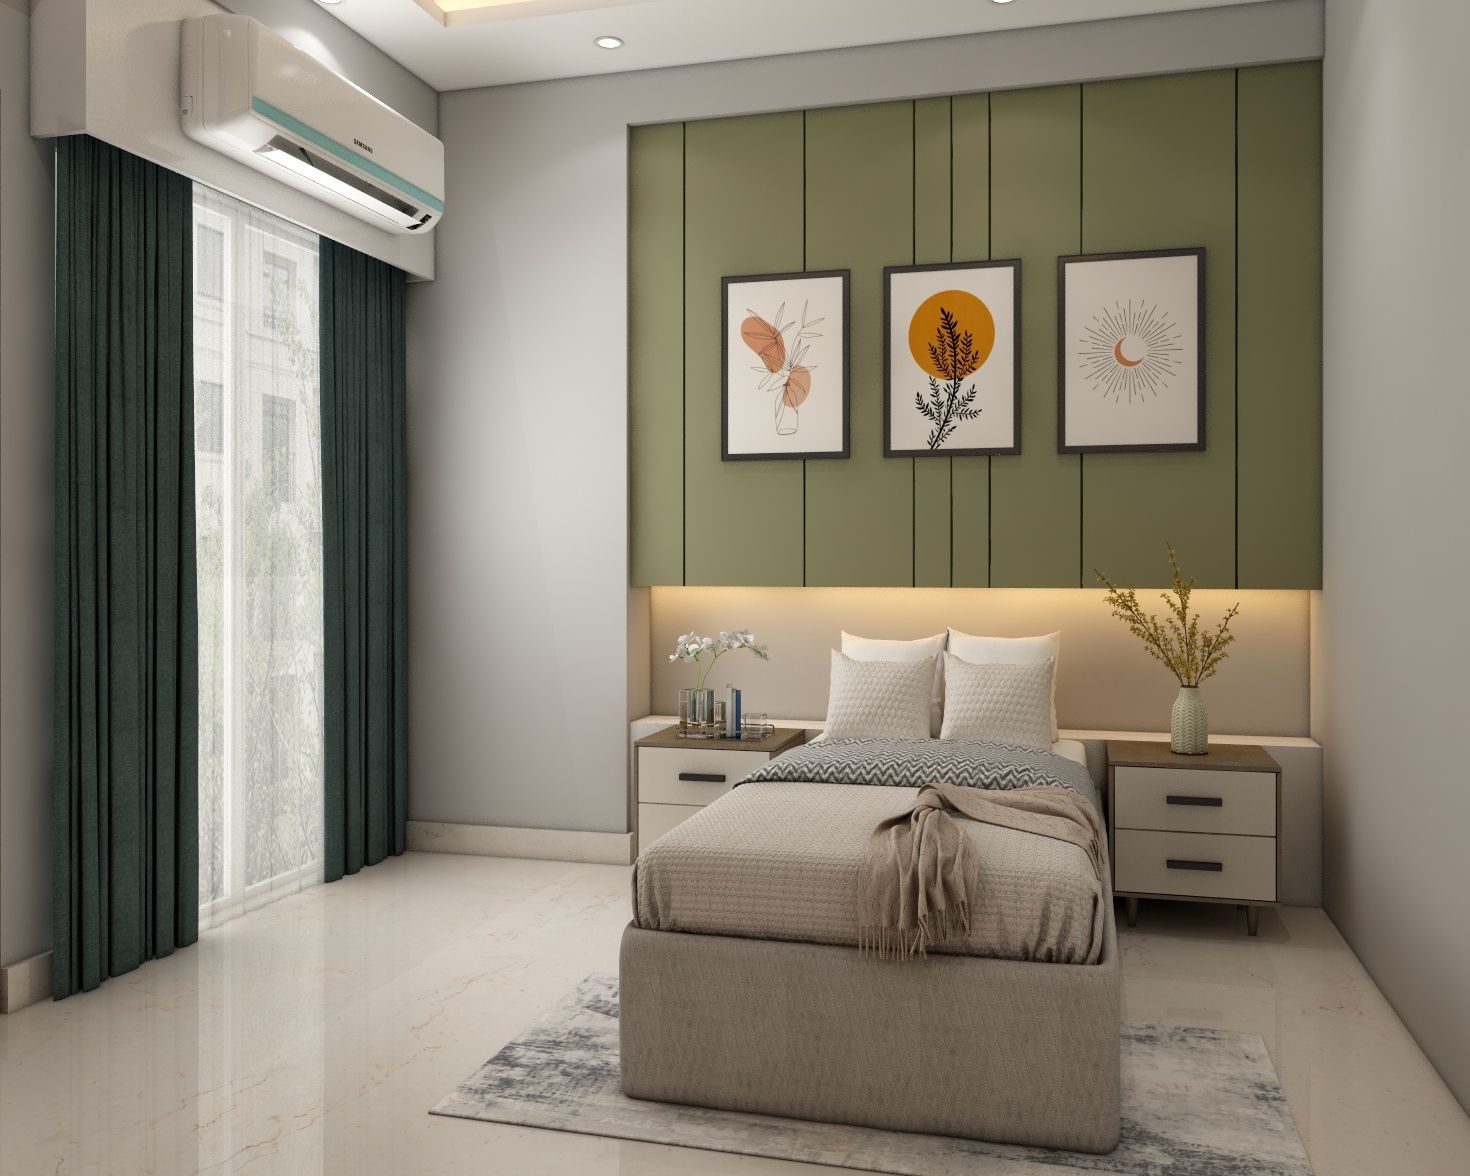 Contemporary Guest Room Design With With Green Wall Panelling